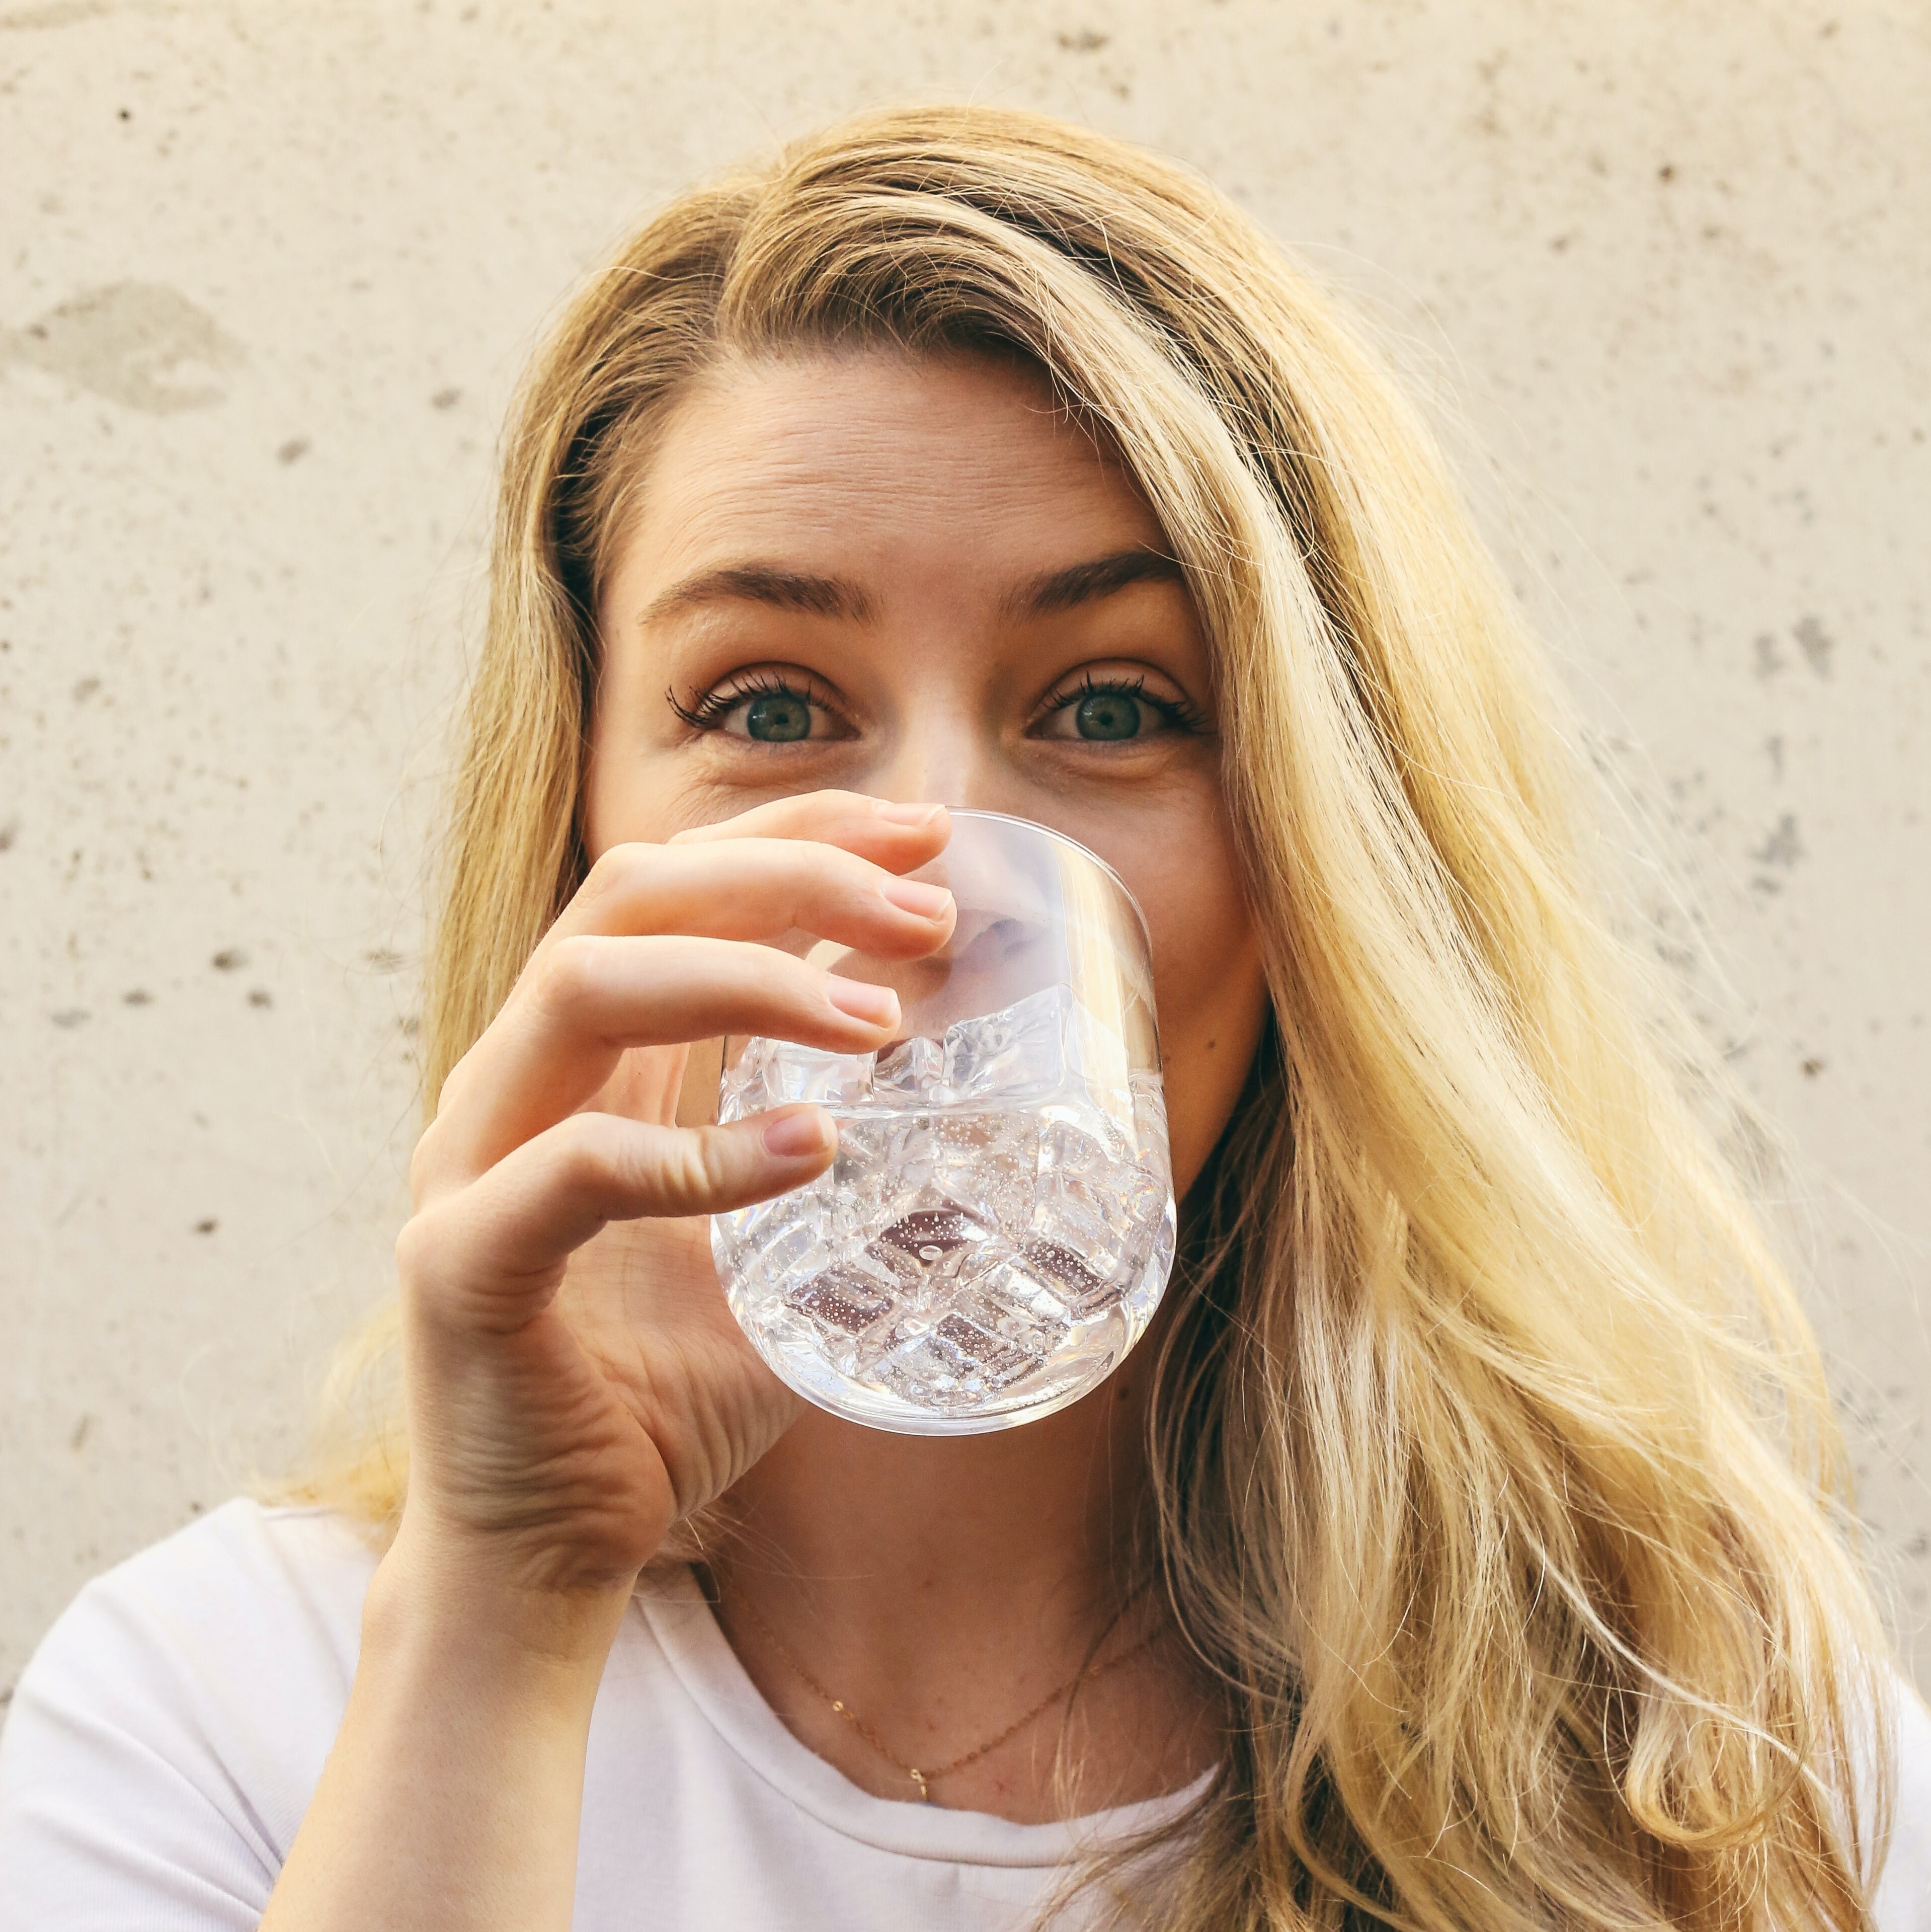 Healthy woman drinking a glass of water